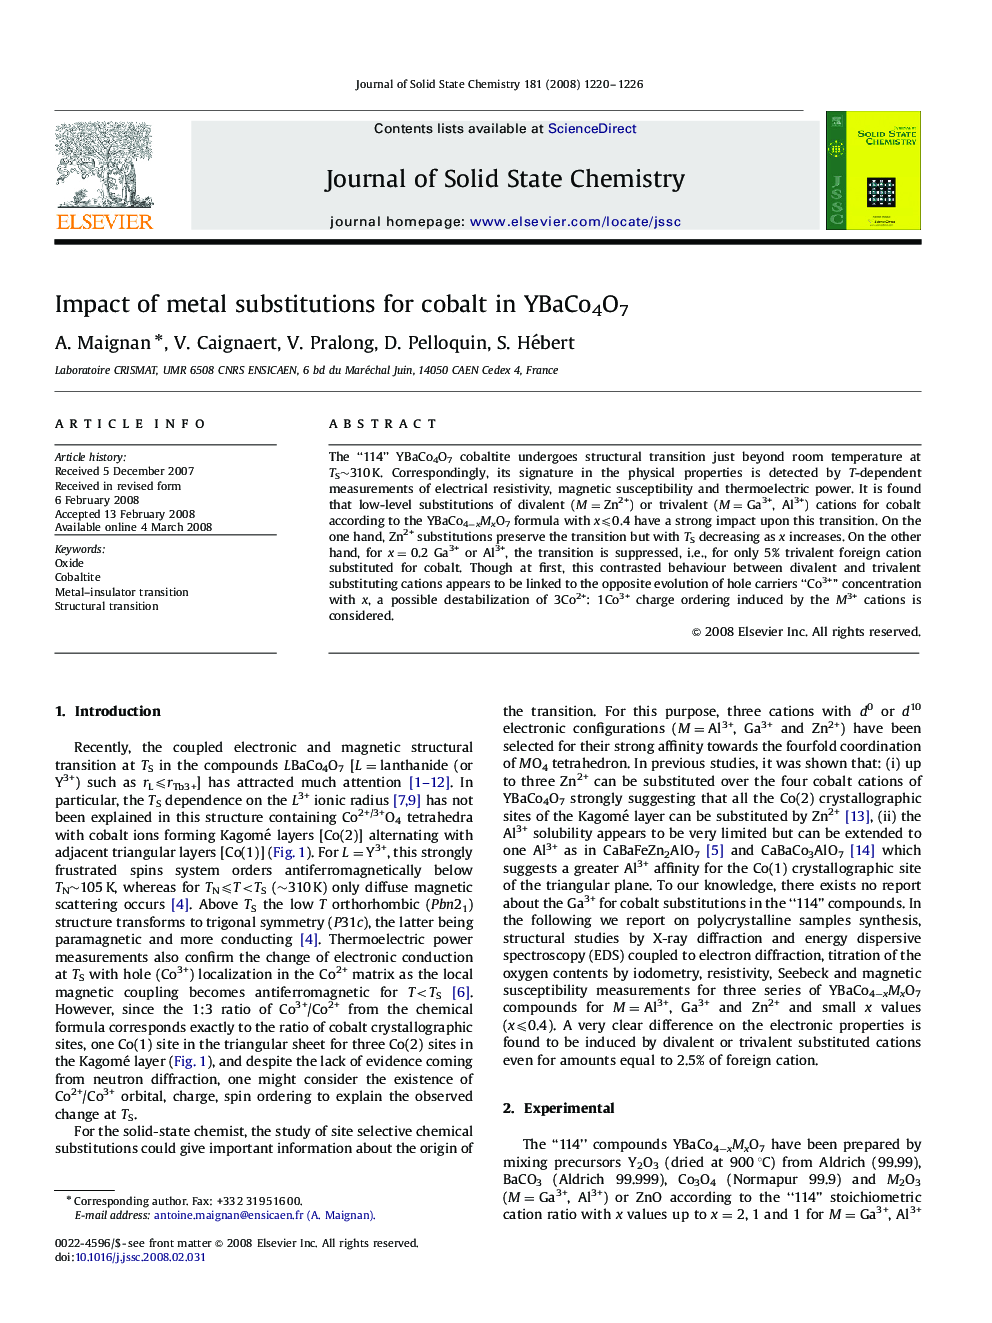 Impact of metal substitutions for cobalt in YBaCo4O7